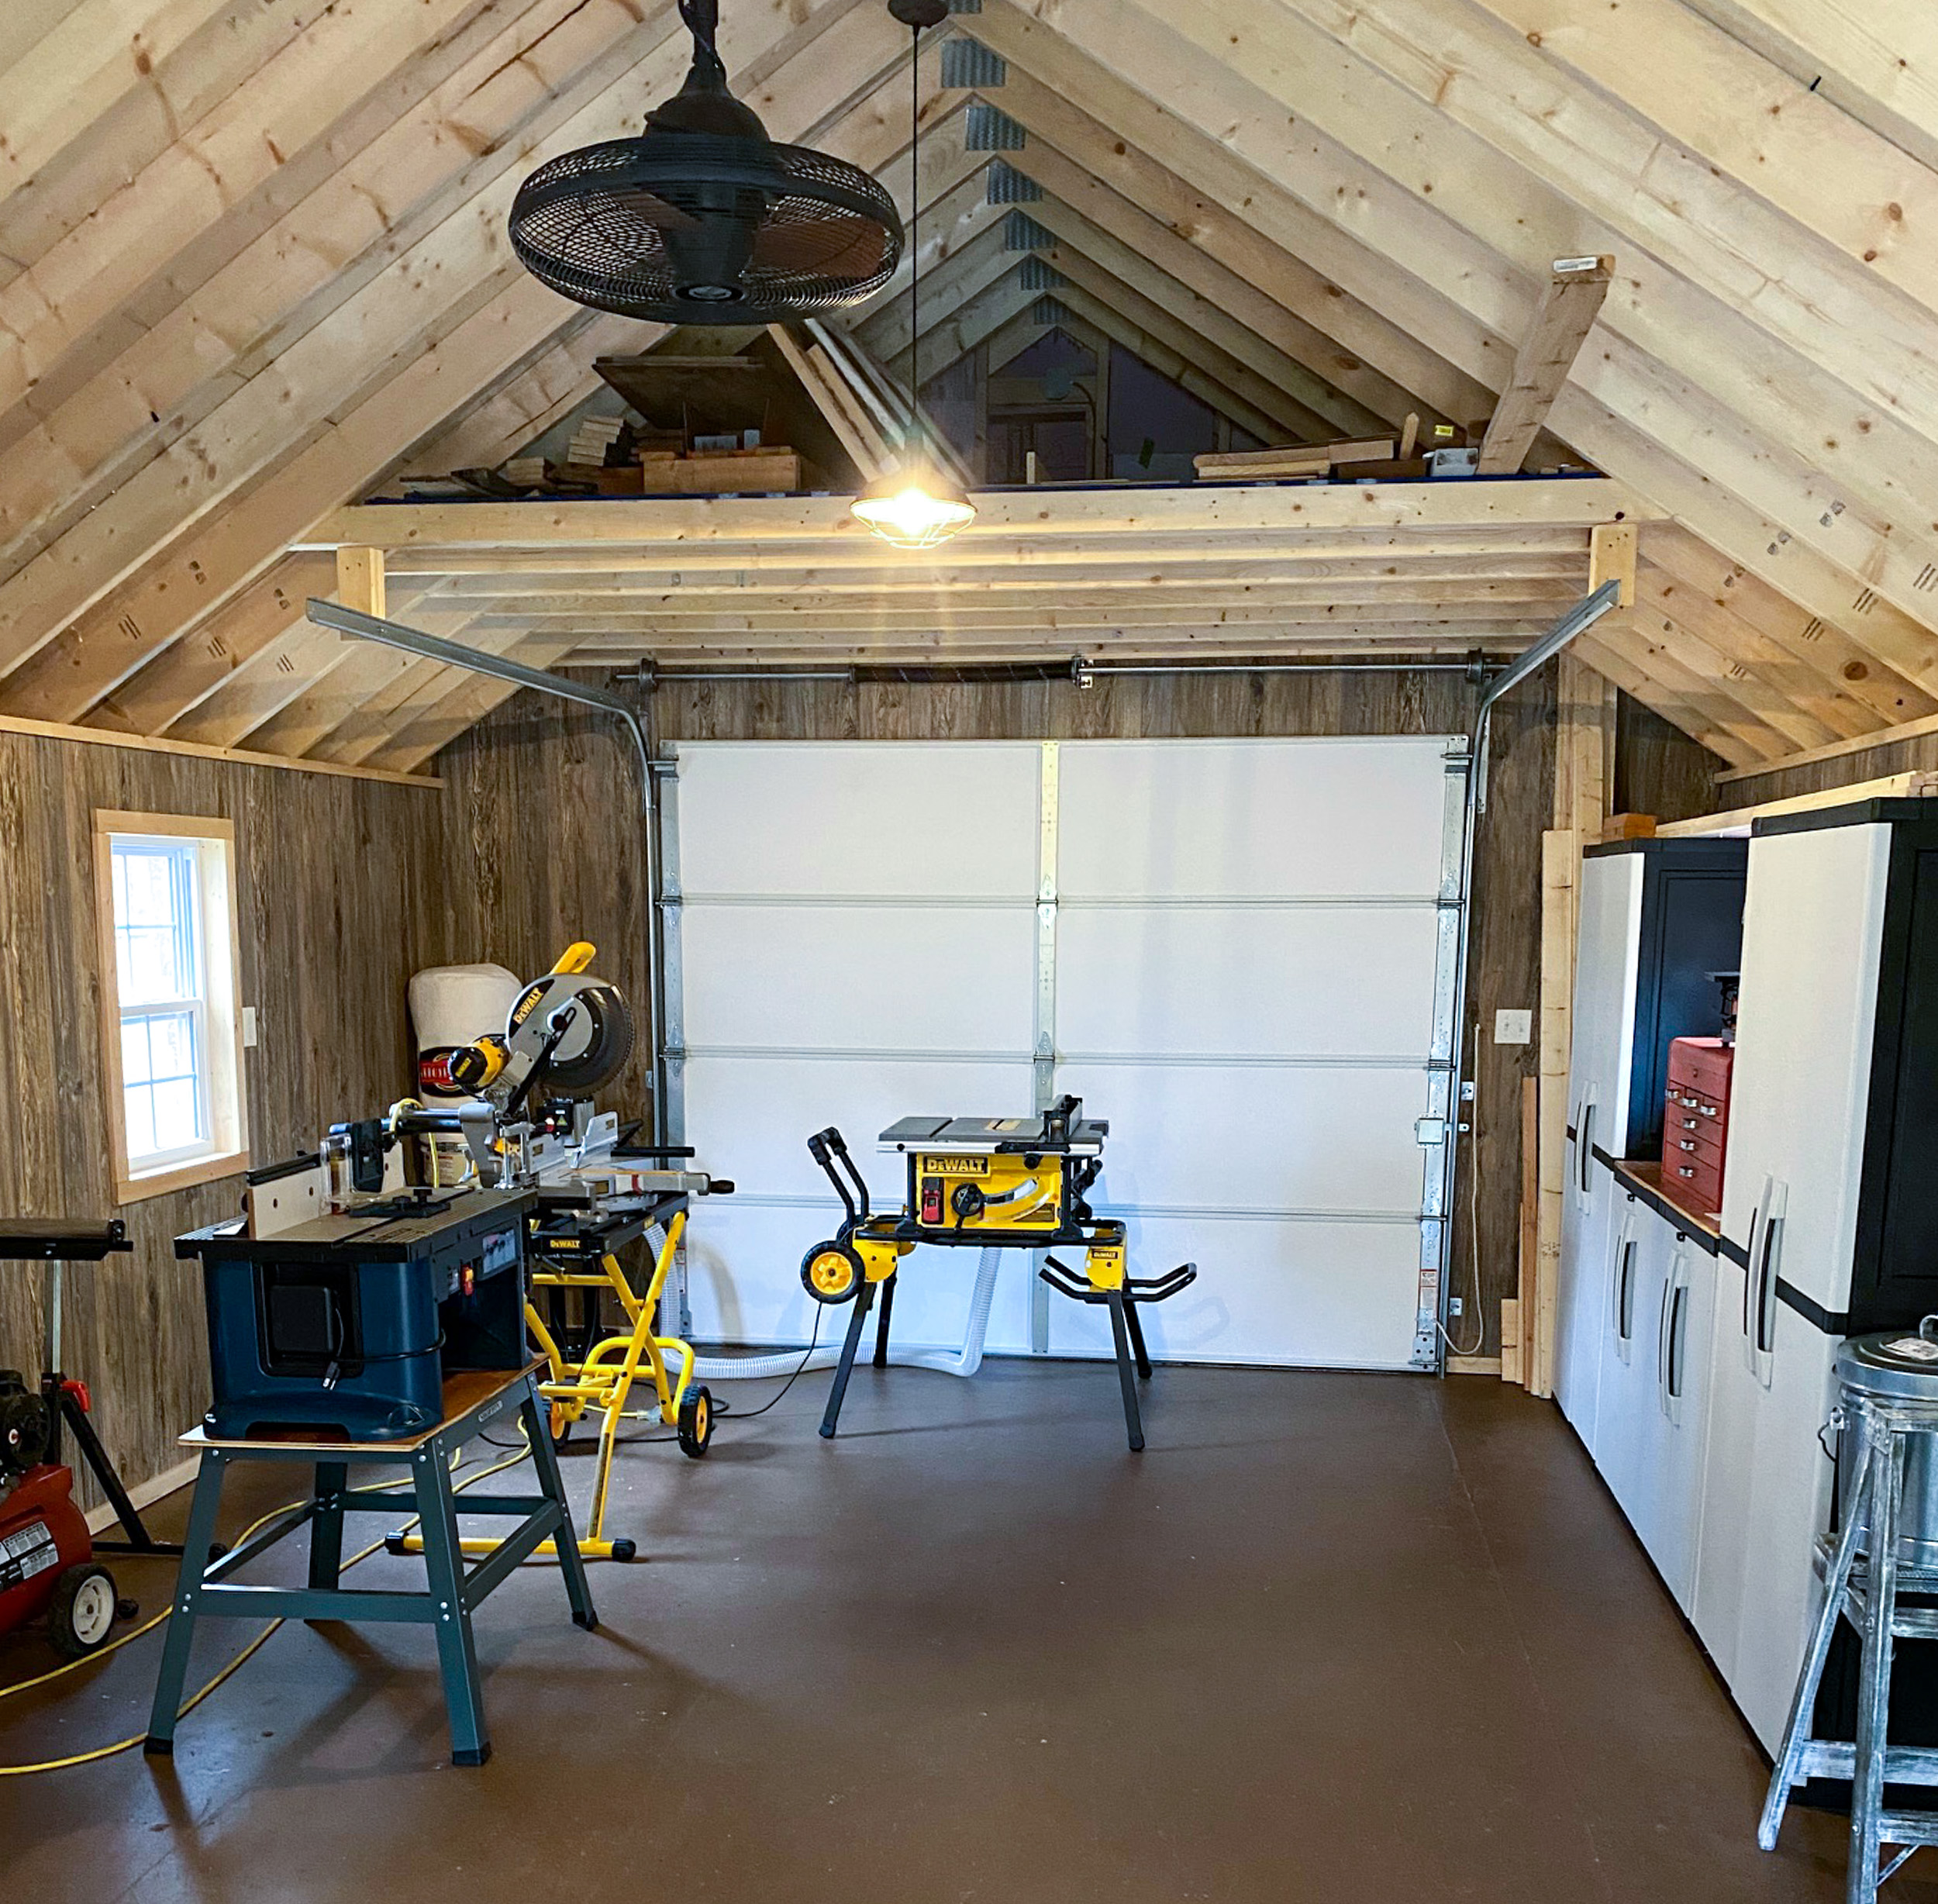 Large Sheds for Storage & Work Space